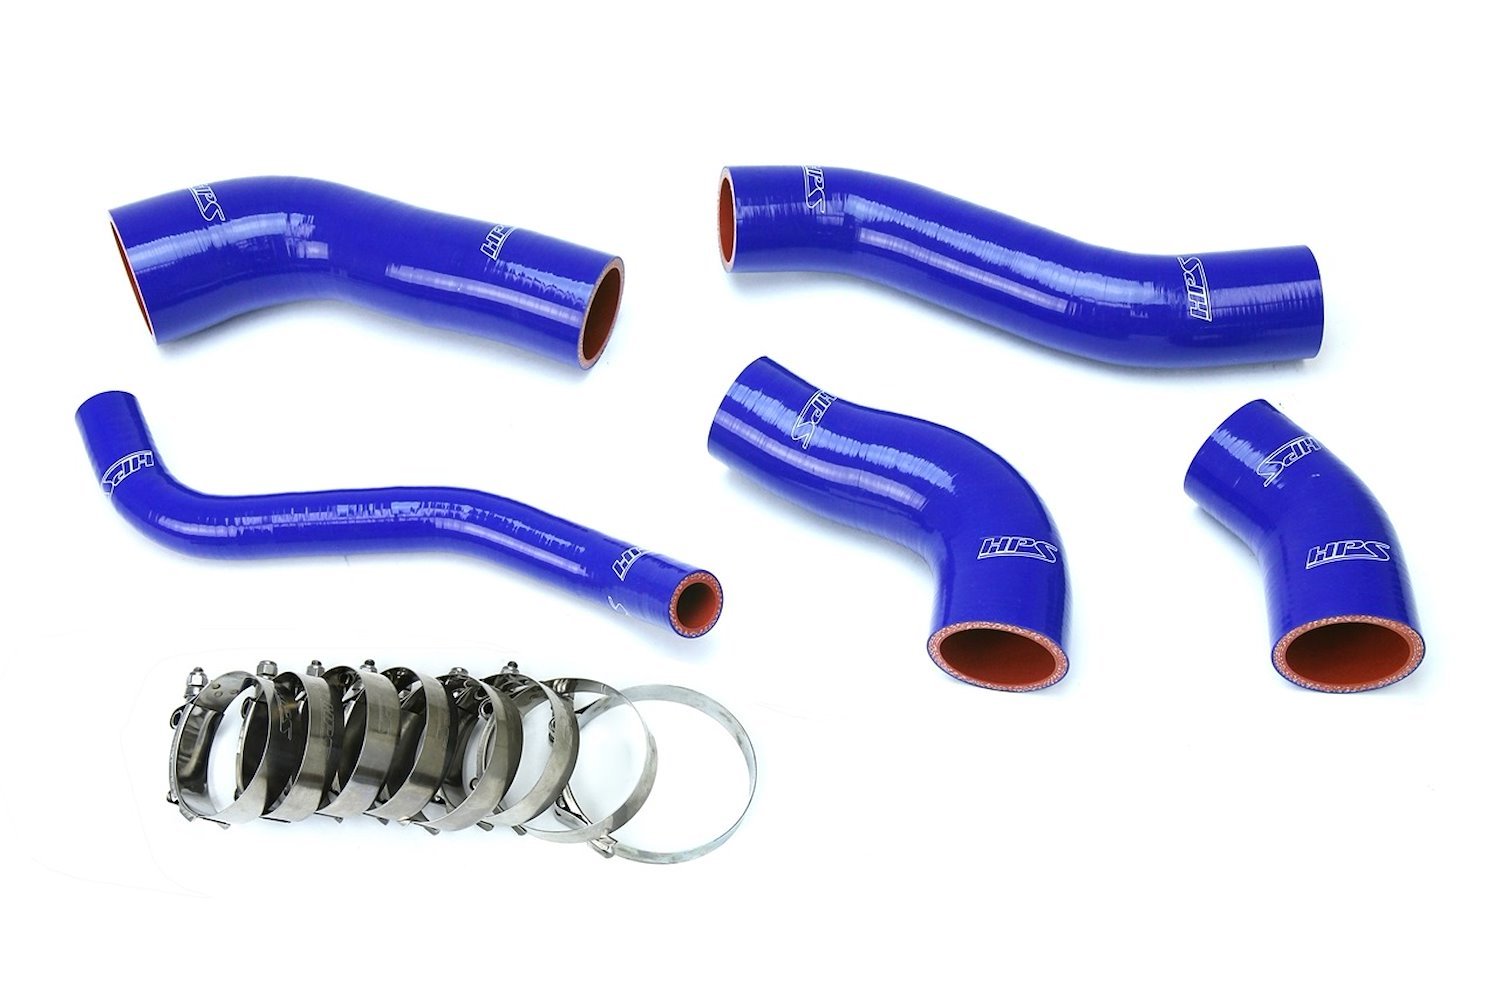 57-1629-BLUE Intercooler Hose Kit, High-Temp 4-Ply Reinforced Silicone, Replace OEM Rubber Intercooler Turbo Boots